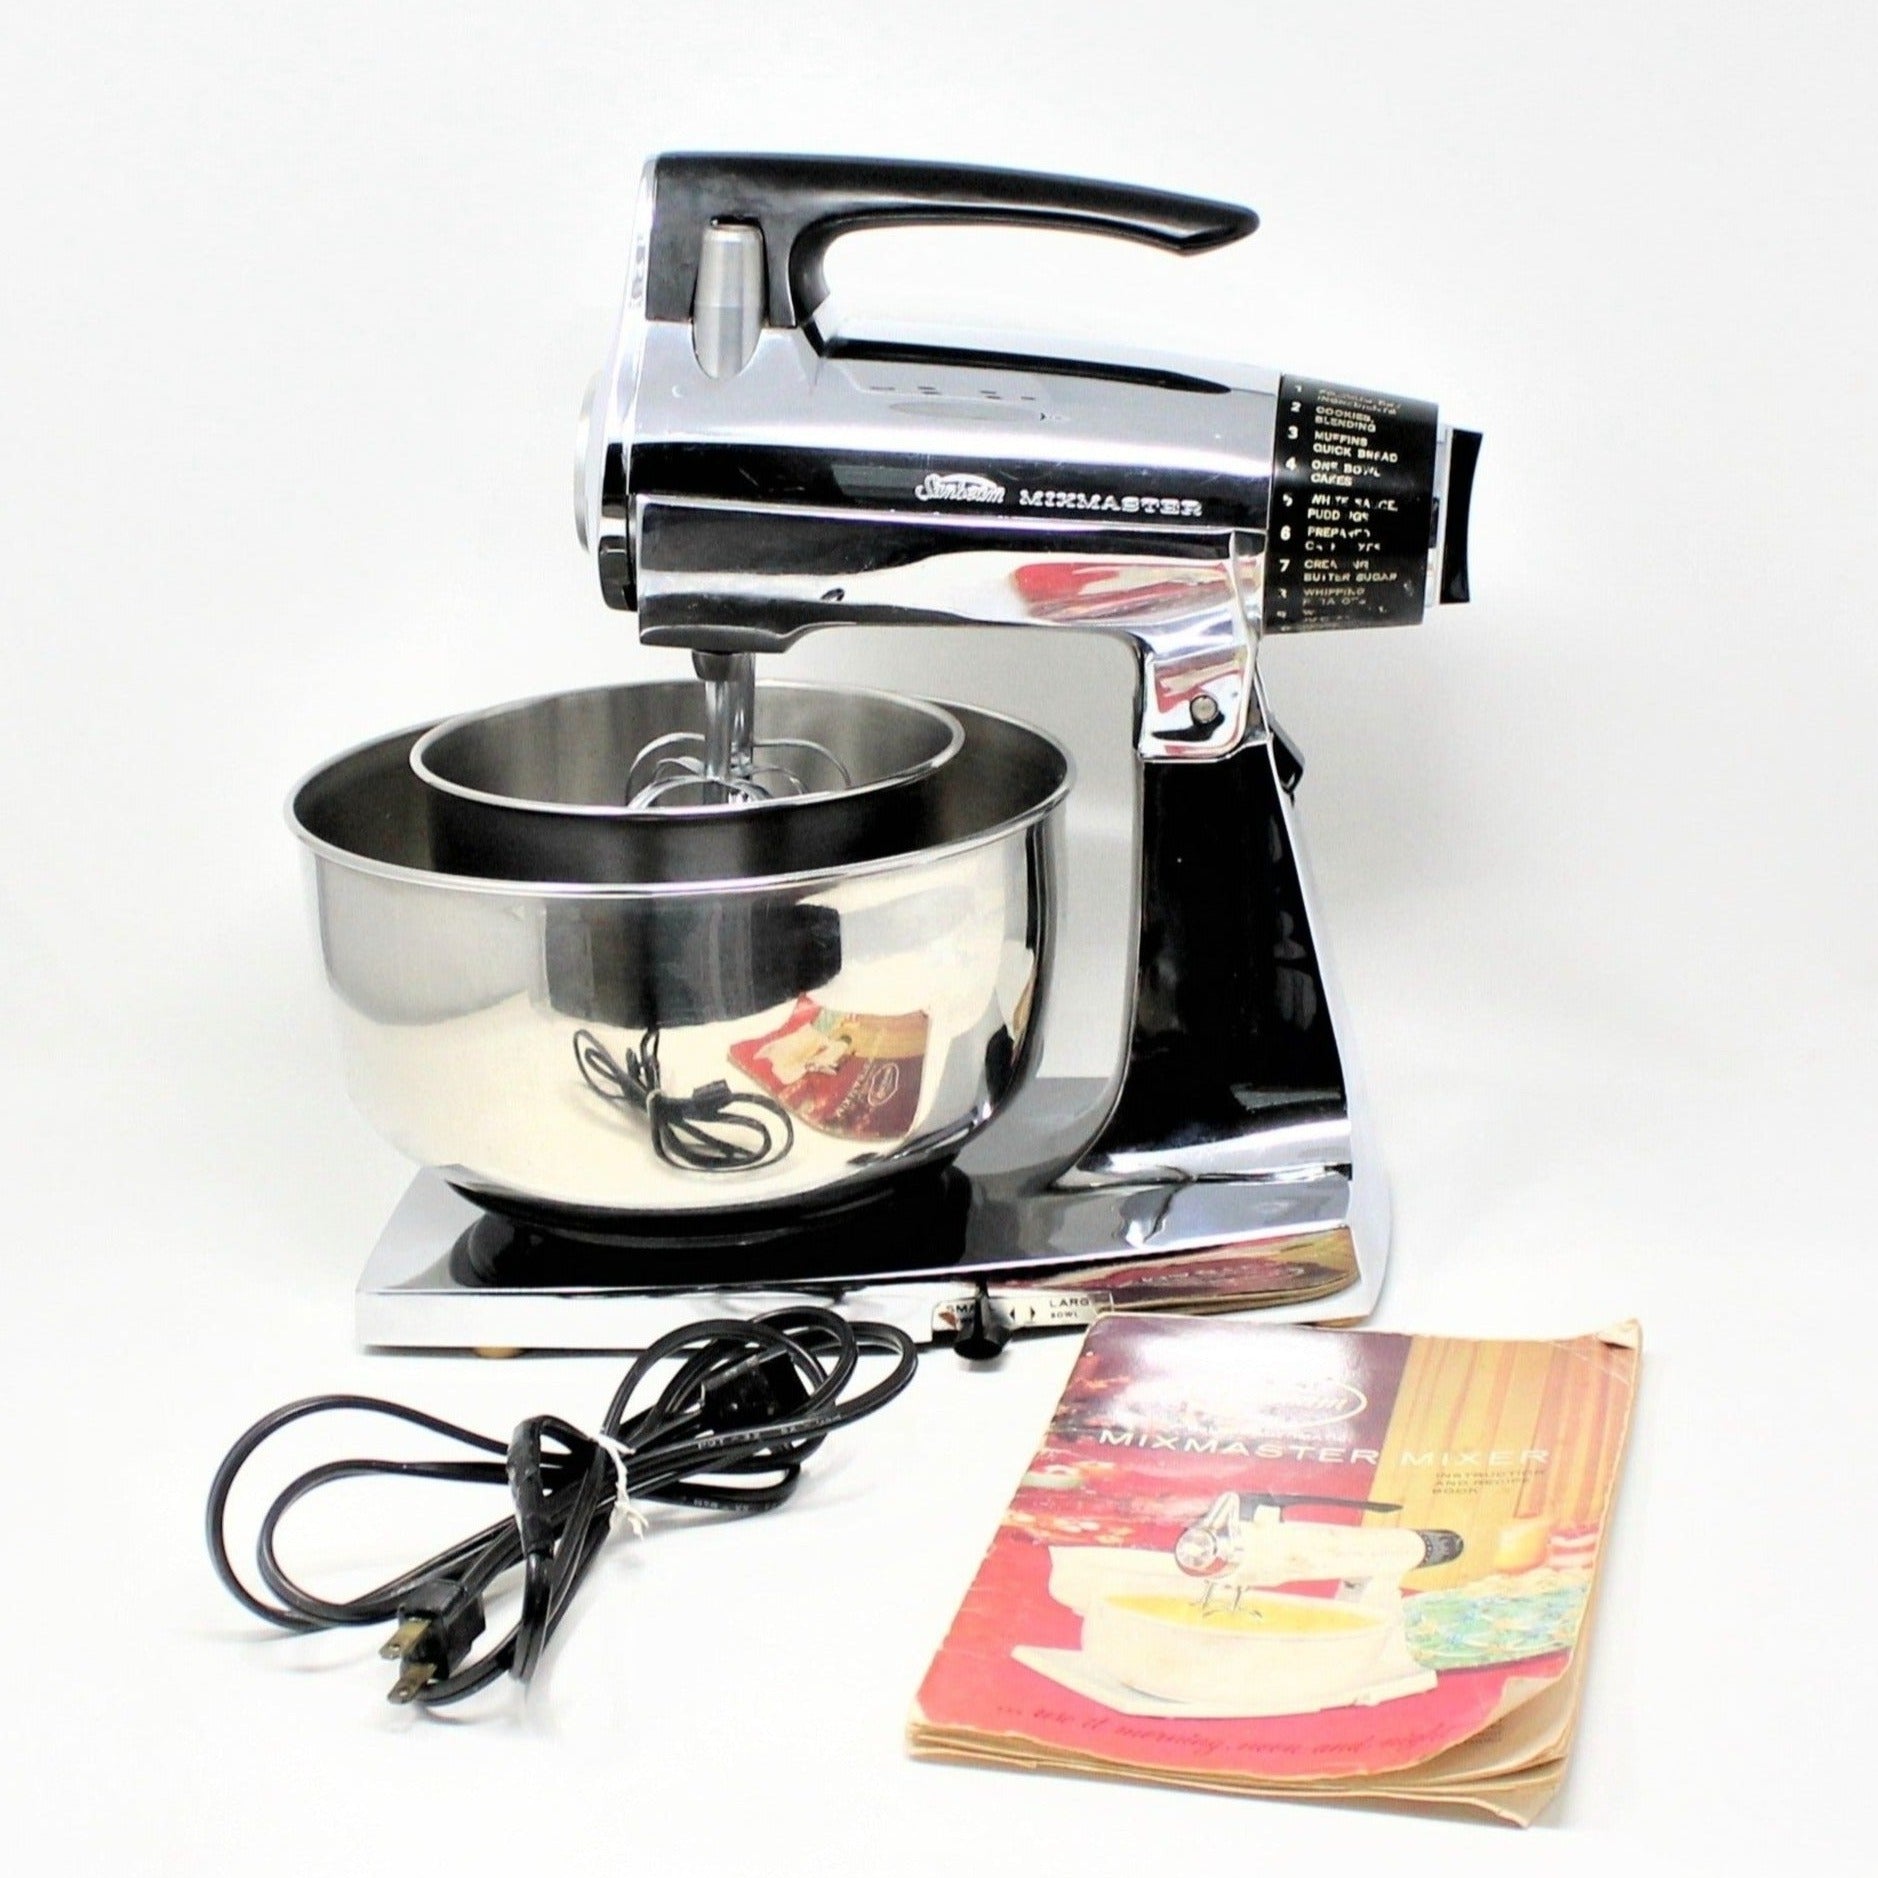 Sunbeam Vintage Mixmaster Model 10 with Beaters Original Papers